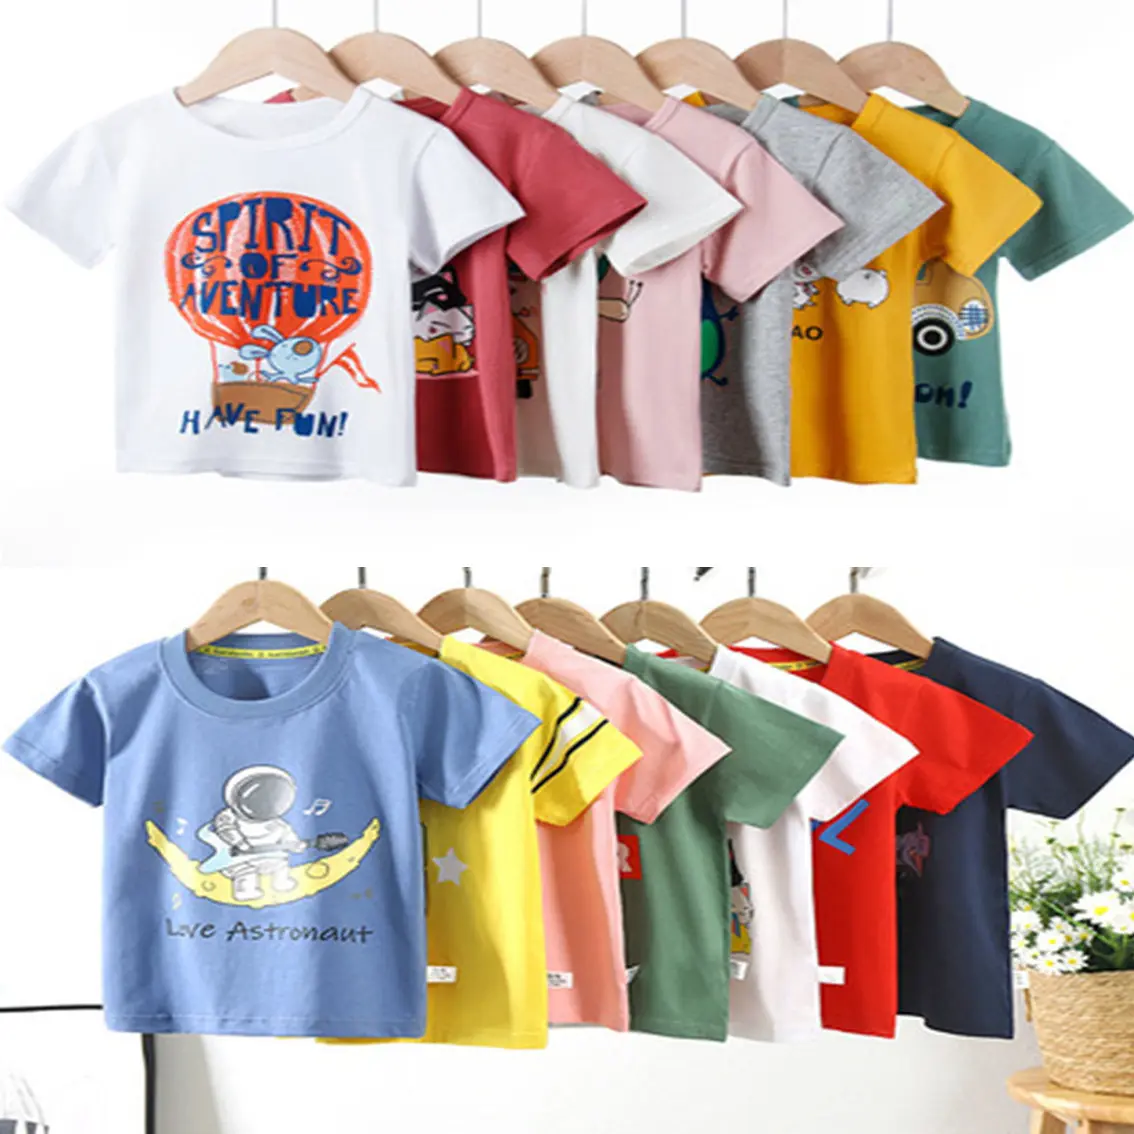 New Arrival Kids Short Sleeve Suit Children's Cotton Kids Clothing Girl Baby Boy Clothes T-shirts